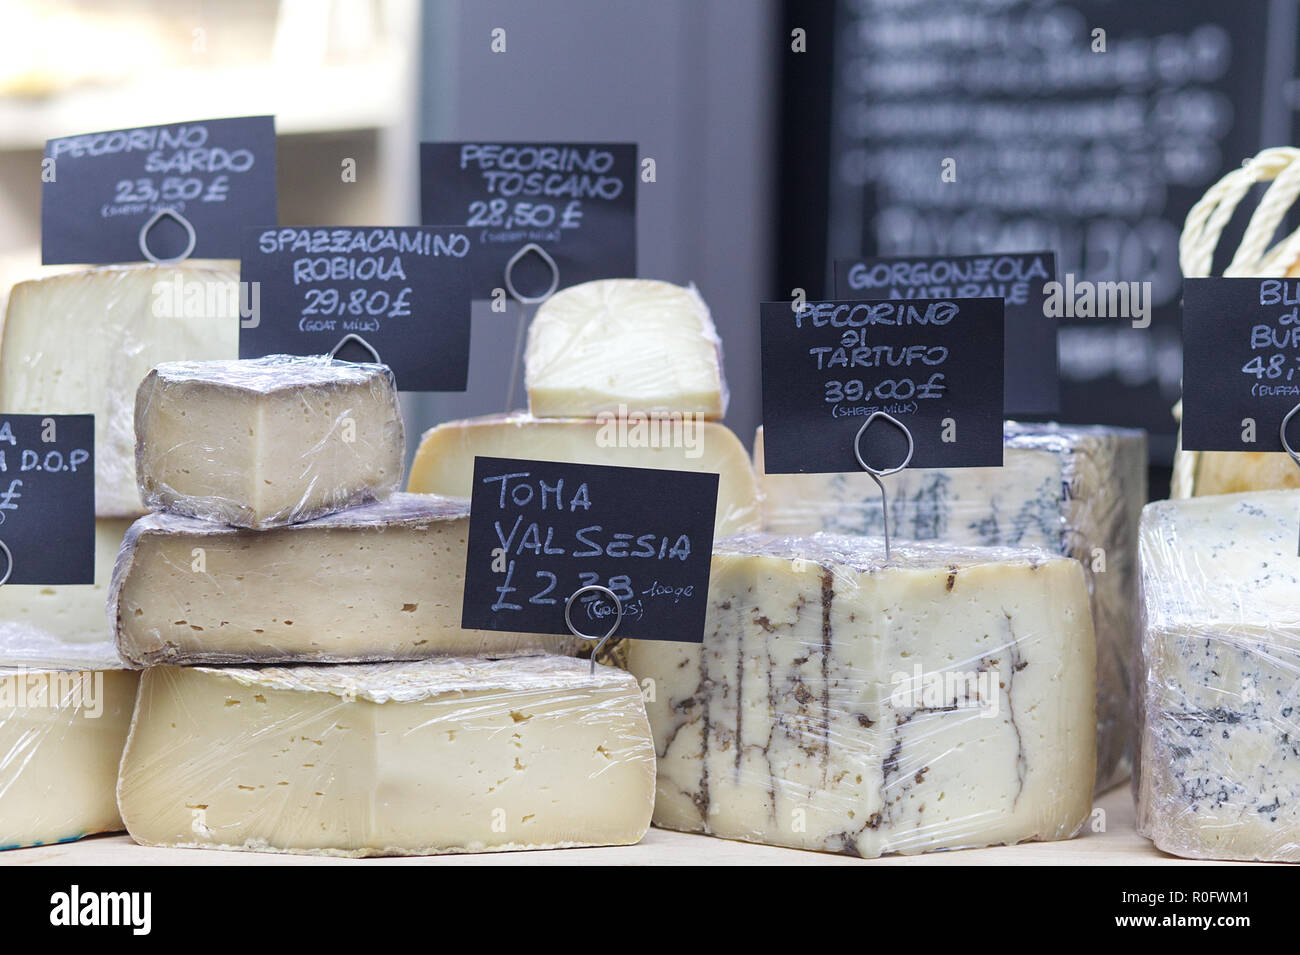 Assorted Cheeses on a market stall Stock Photo